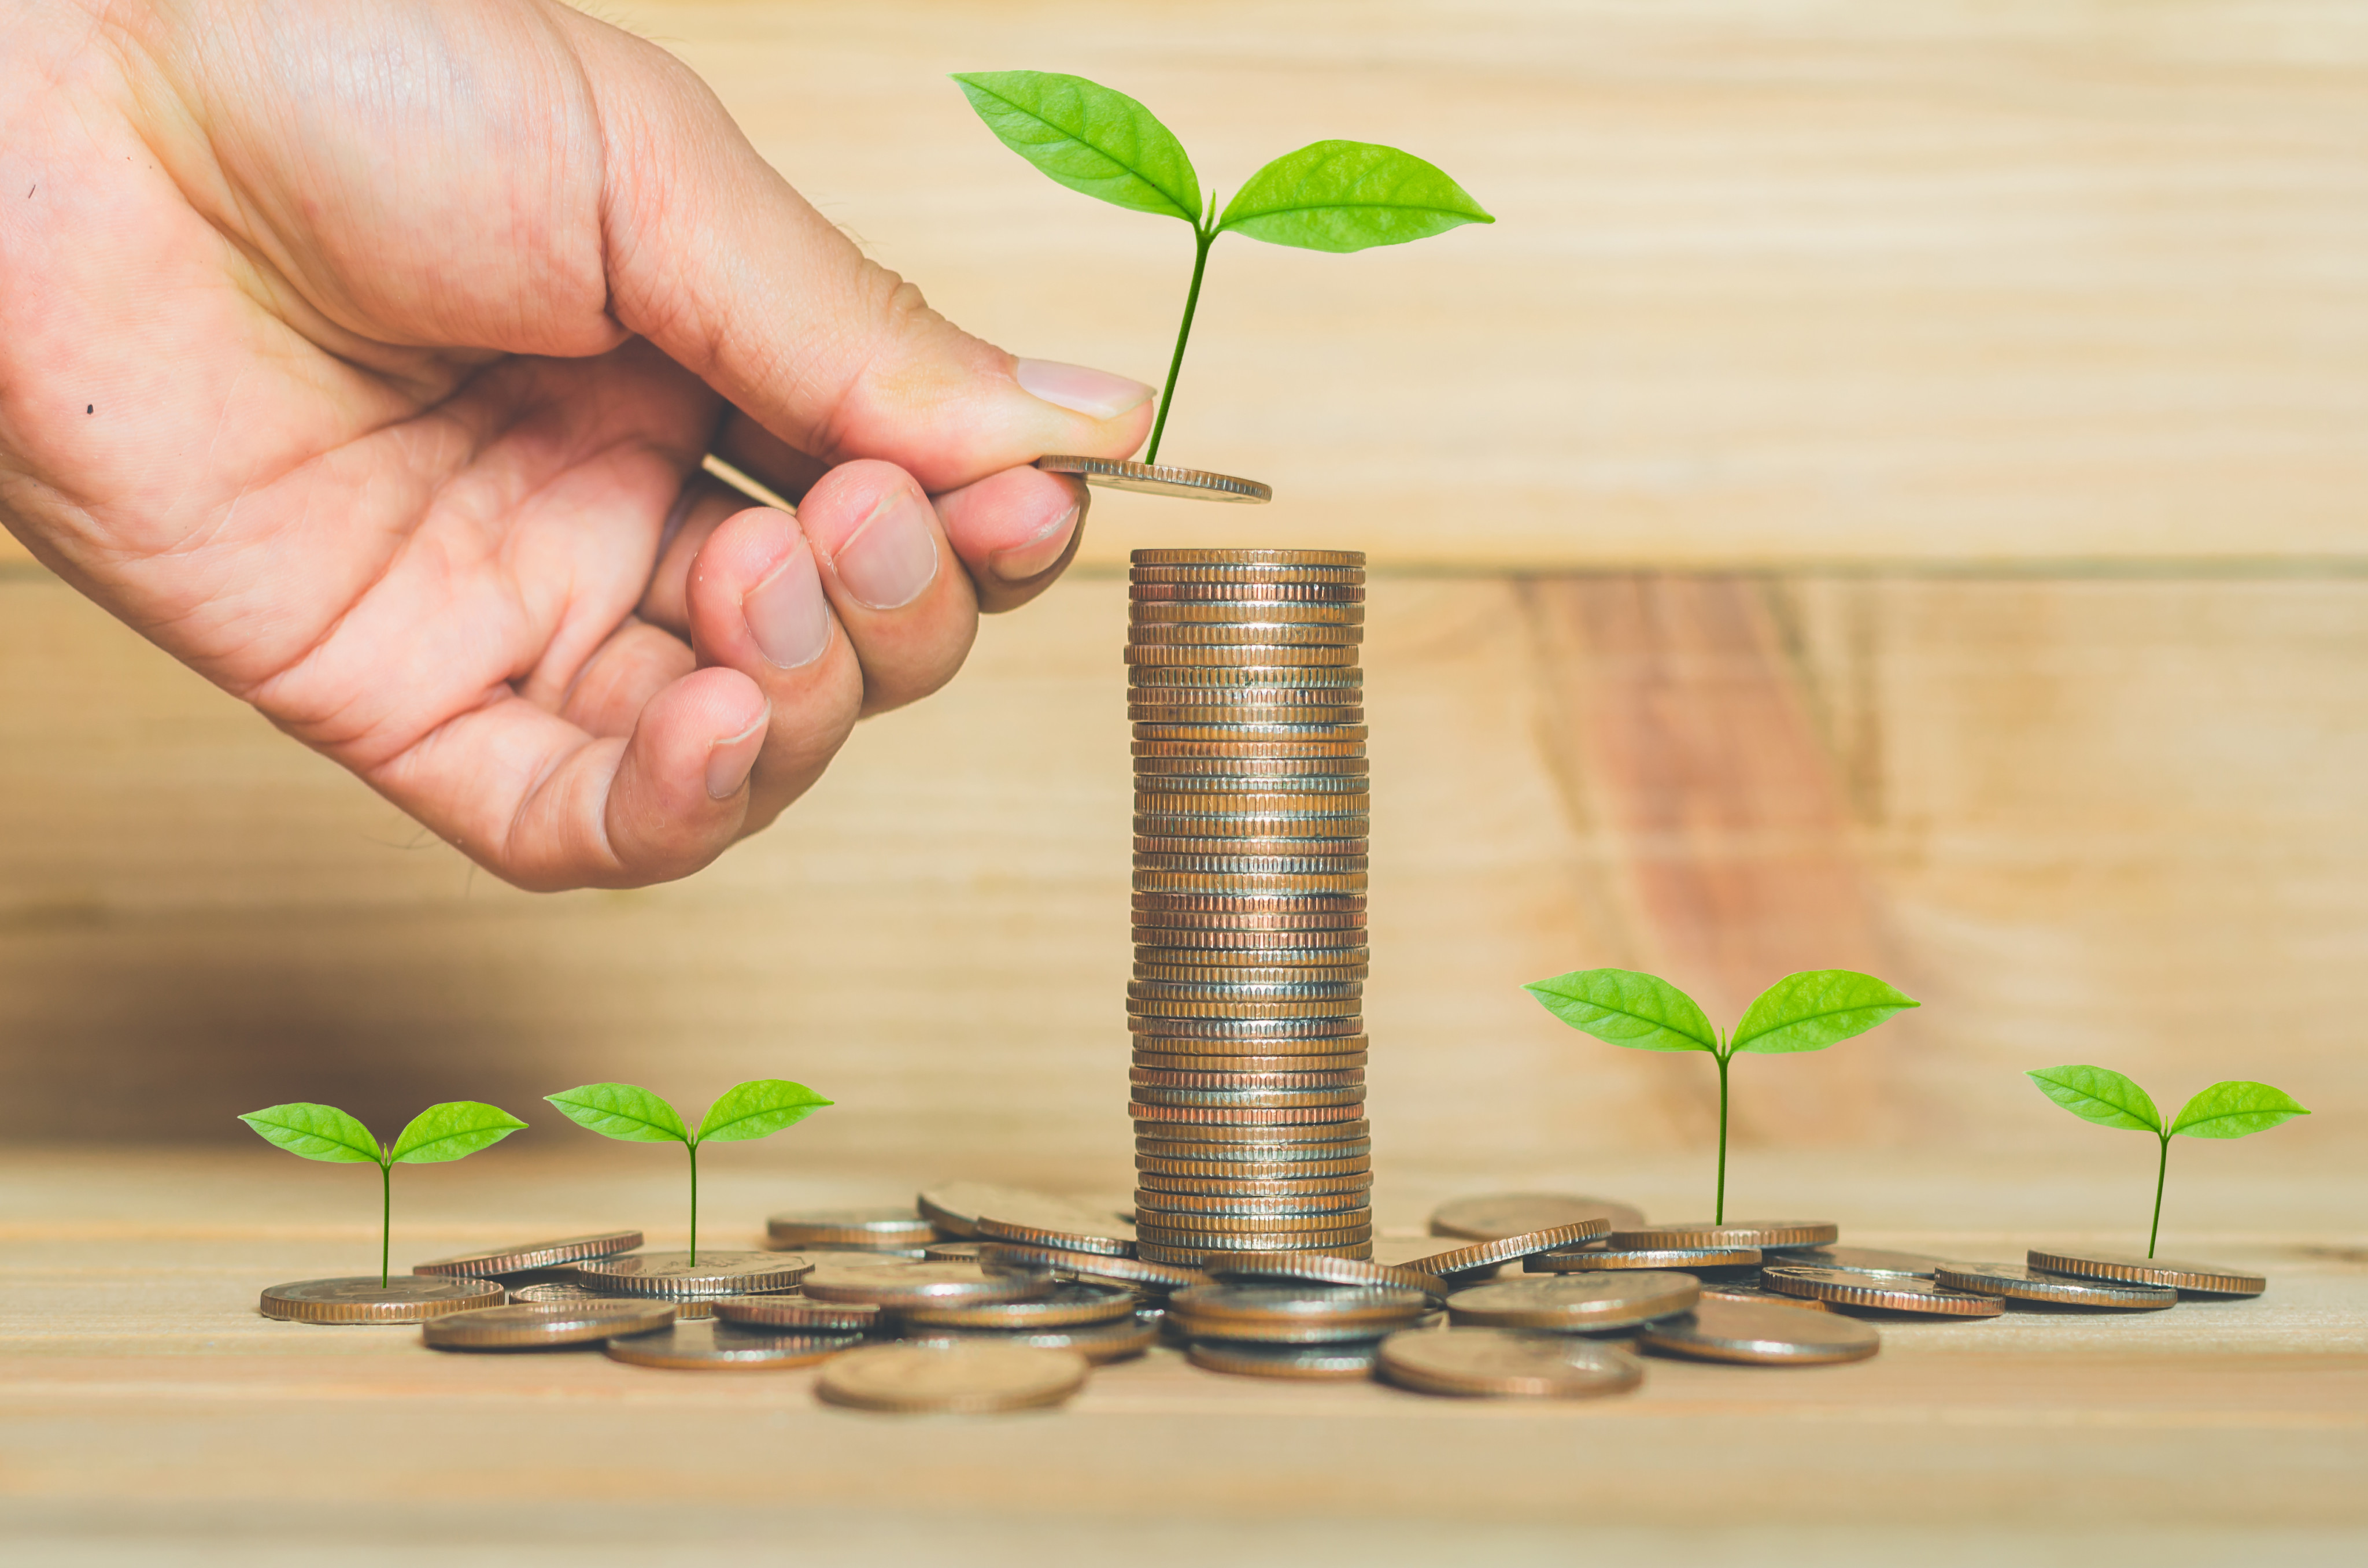 Chinese banks are likely to increase green bond issuances to fund their growing ESG loan portfolios. Photo: Shutterstock